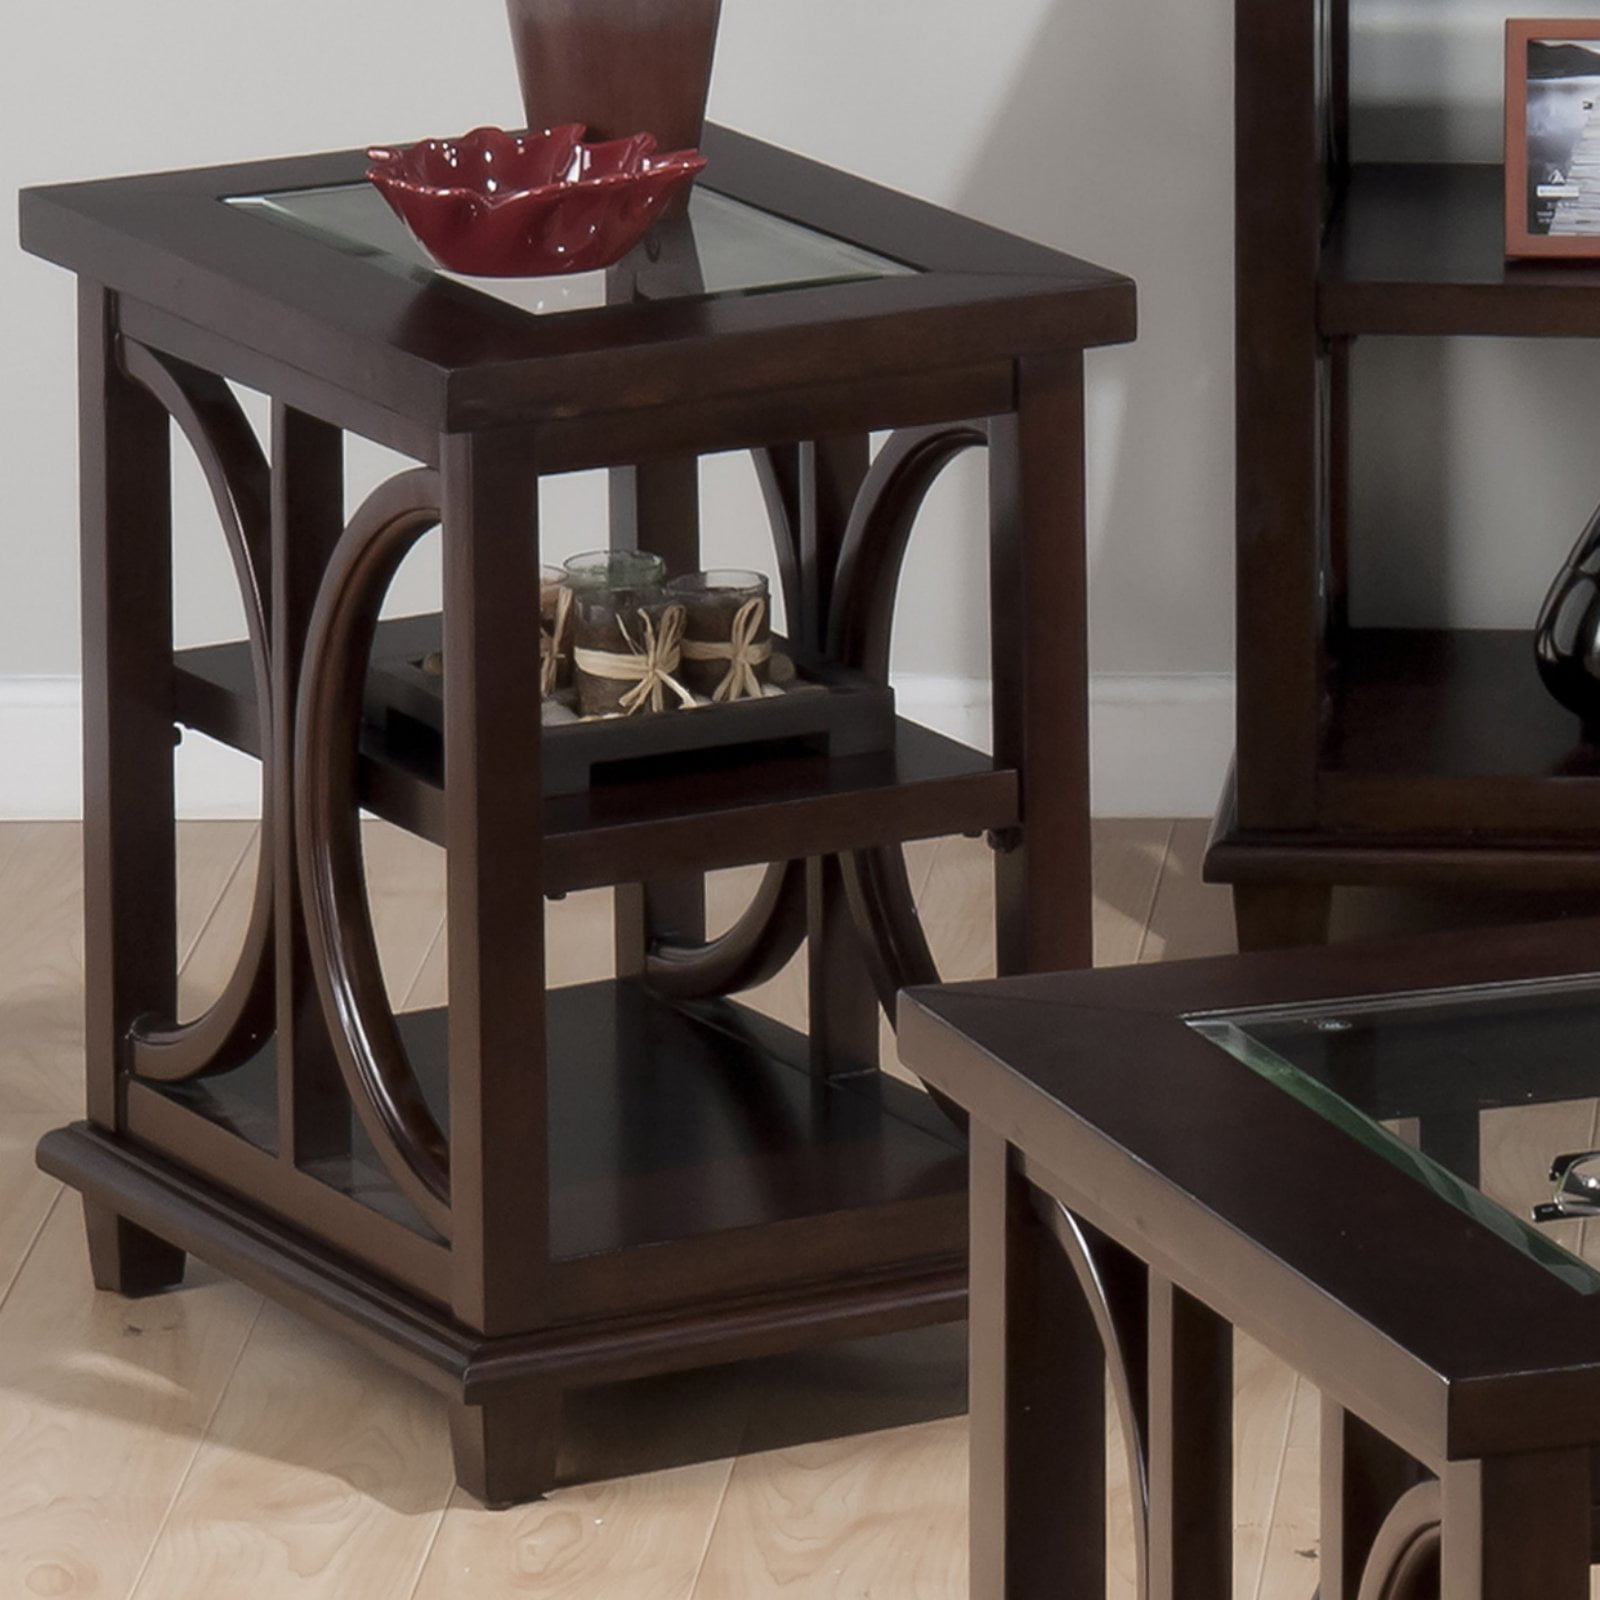 Transitional Style Durable Decorative Displays Pierce Chair Side Table Espresso 